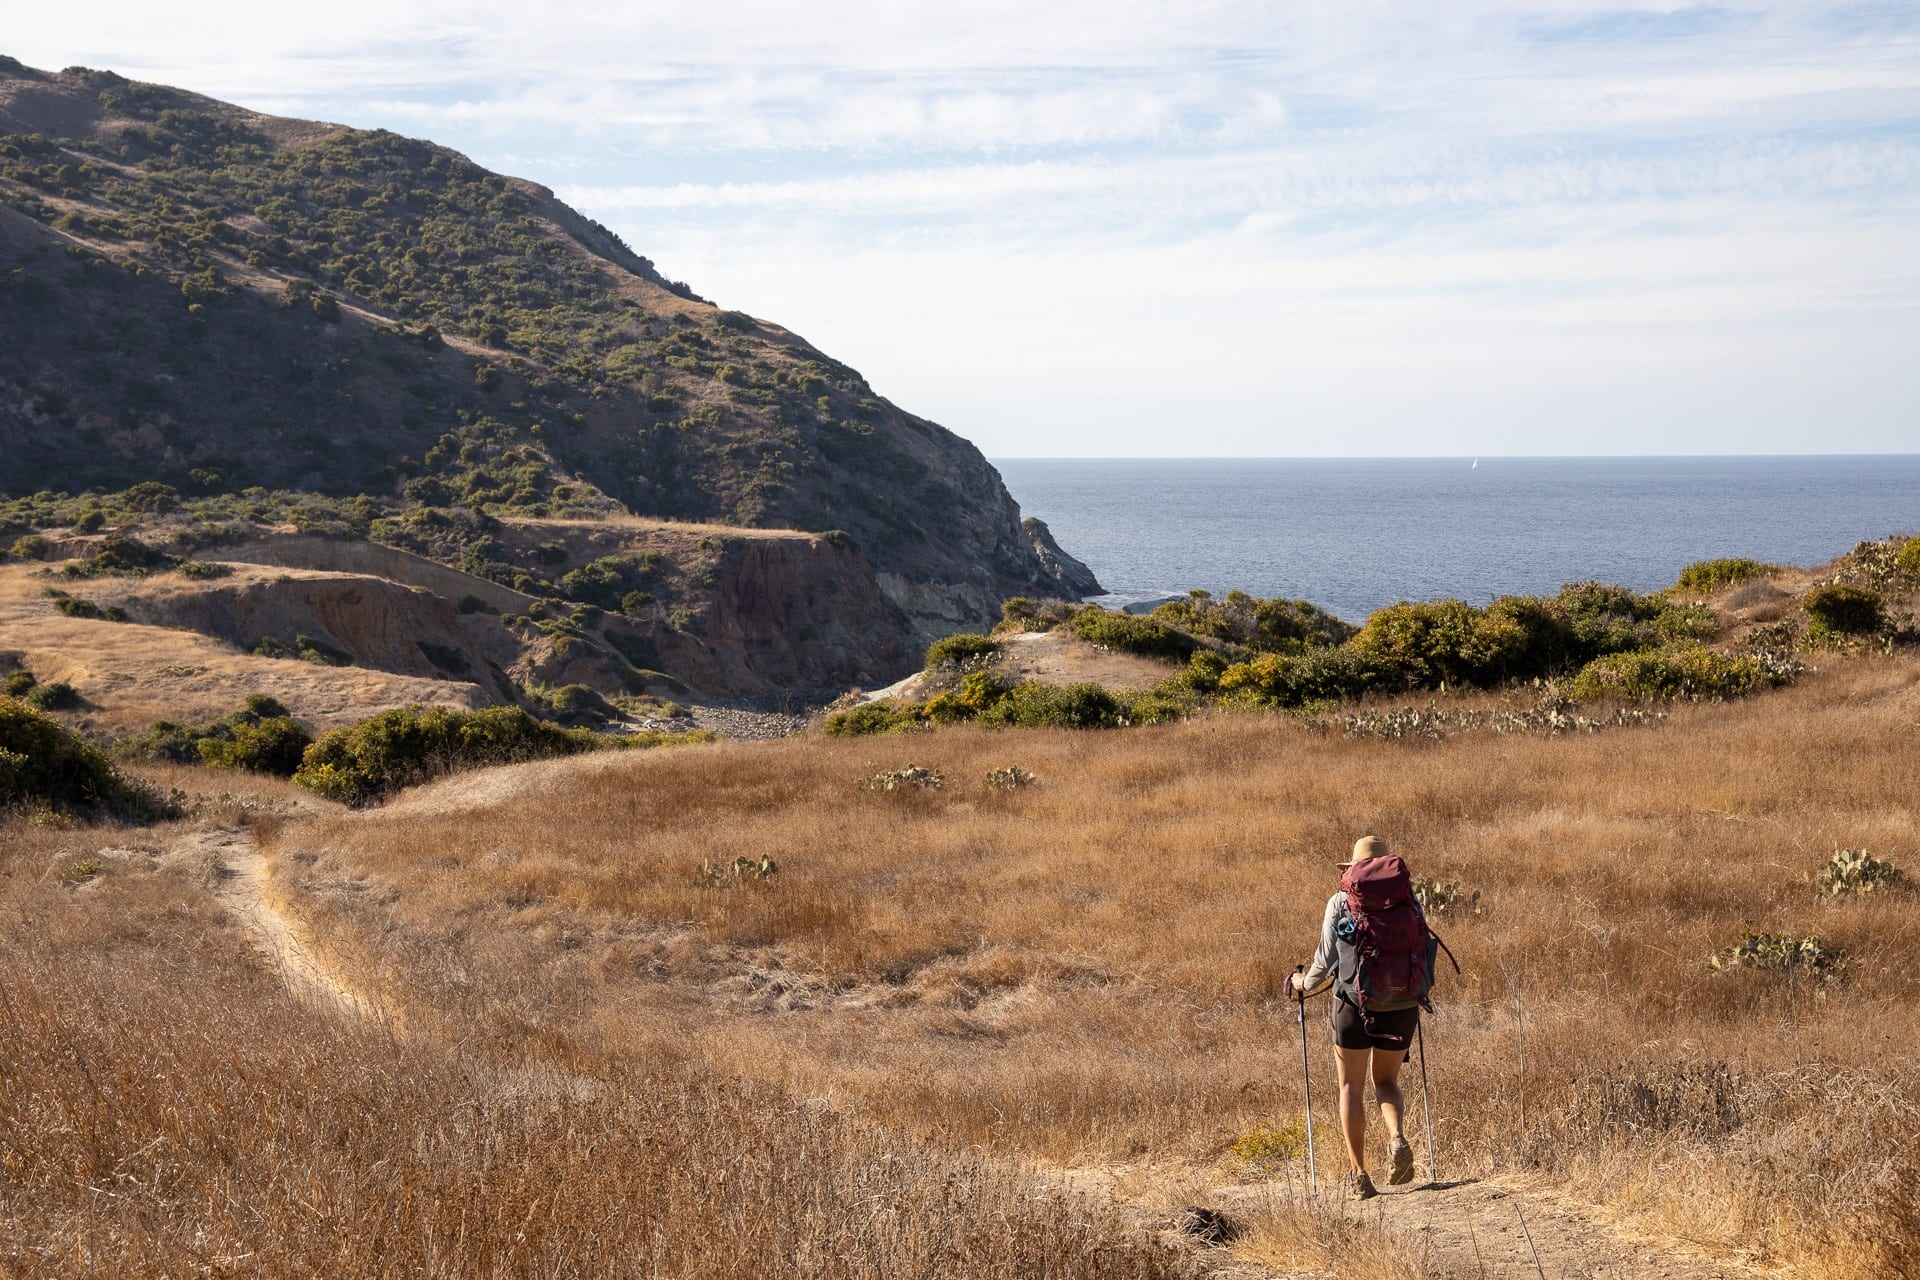 Plan a backpacking trip on the Trans-Catalina Trail on Catalina Island with this trail guide with tips on the best campsites, water availability, gear & more